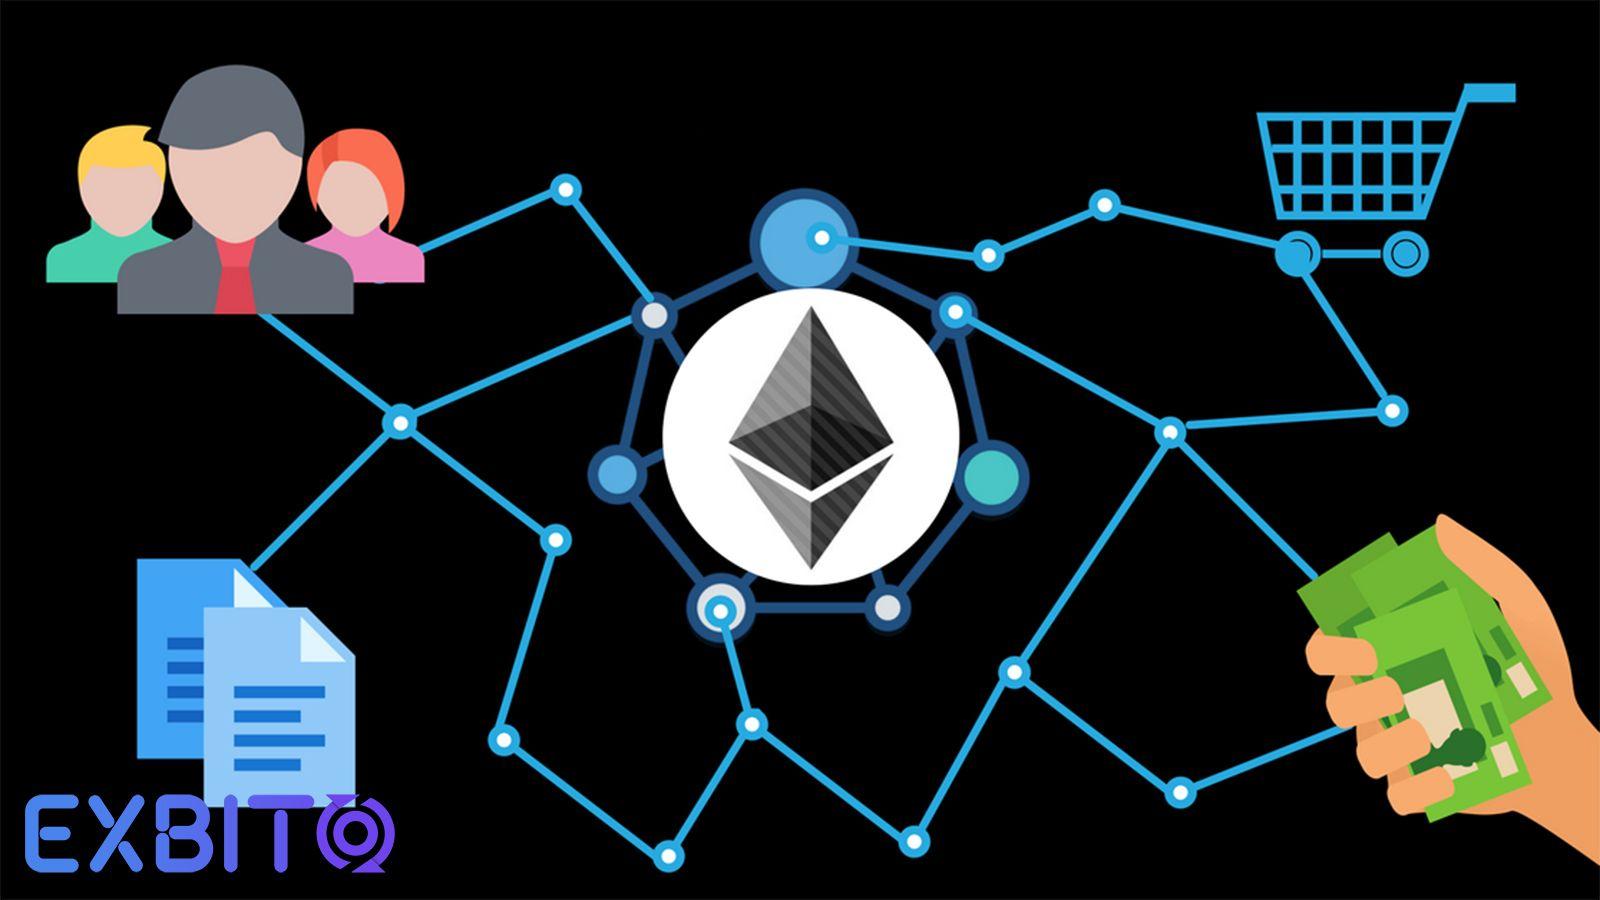 What are ethereum dApp decentralized applications?